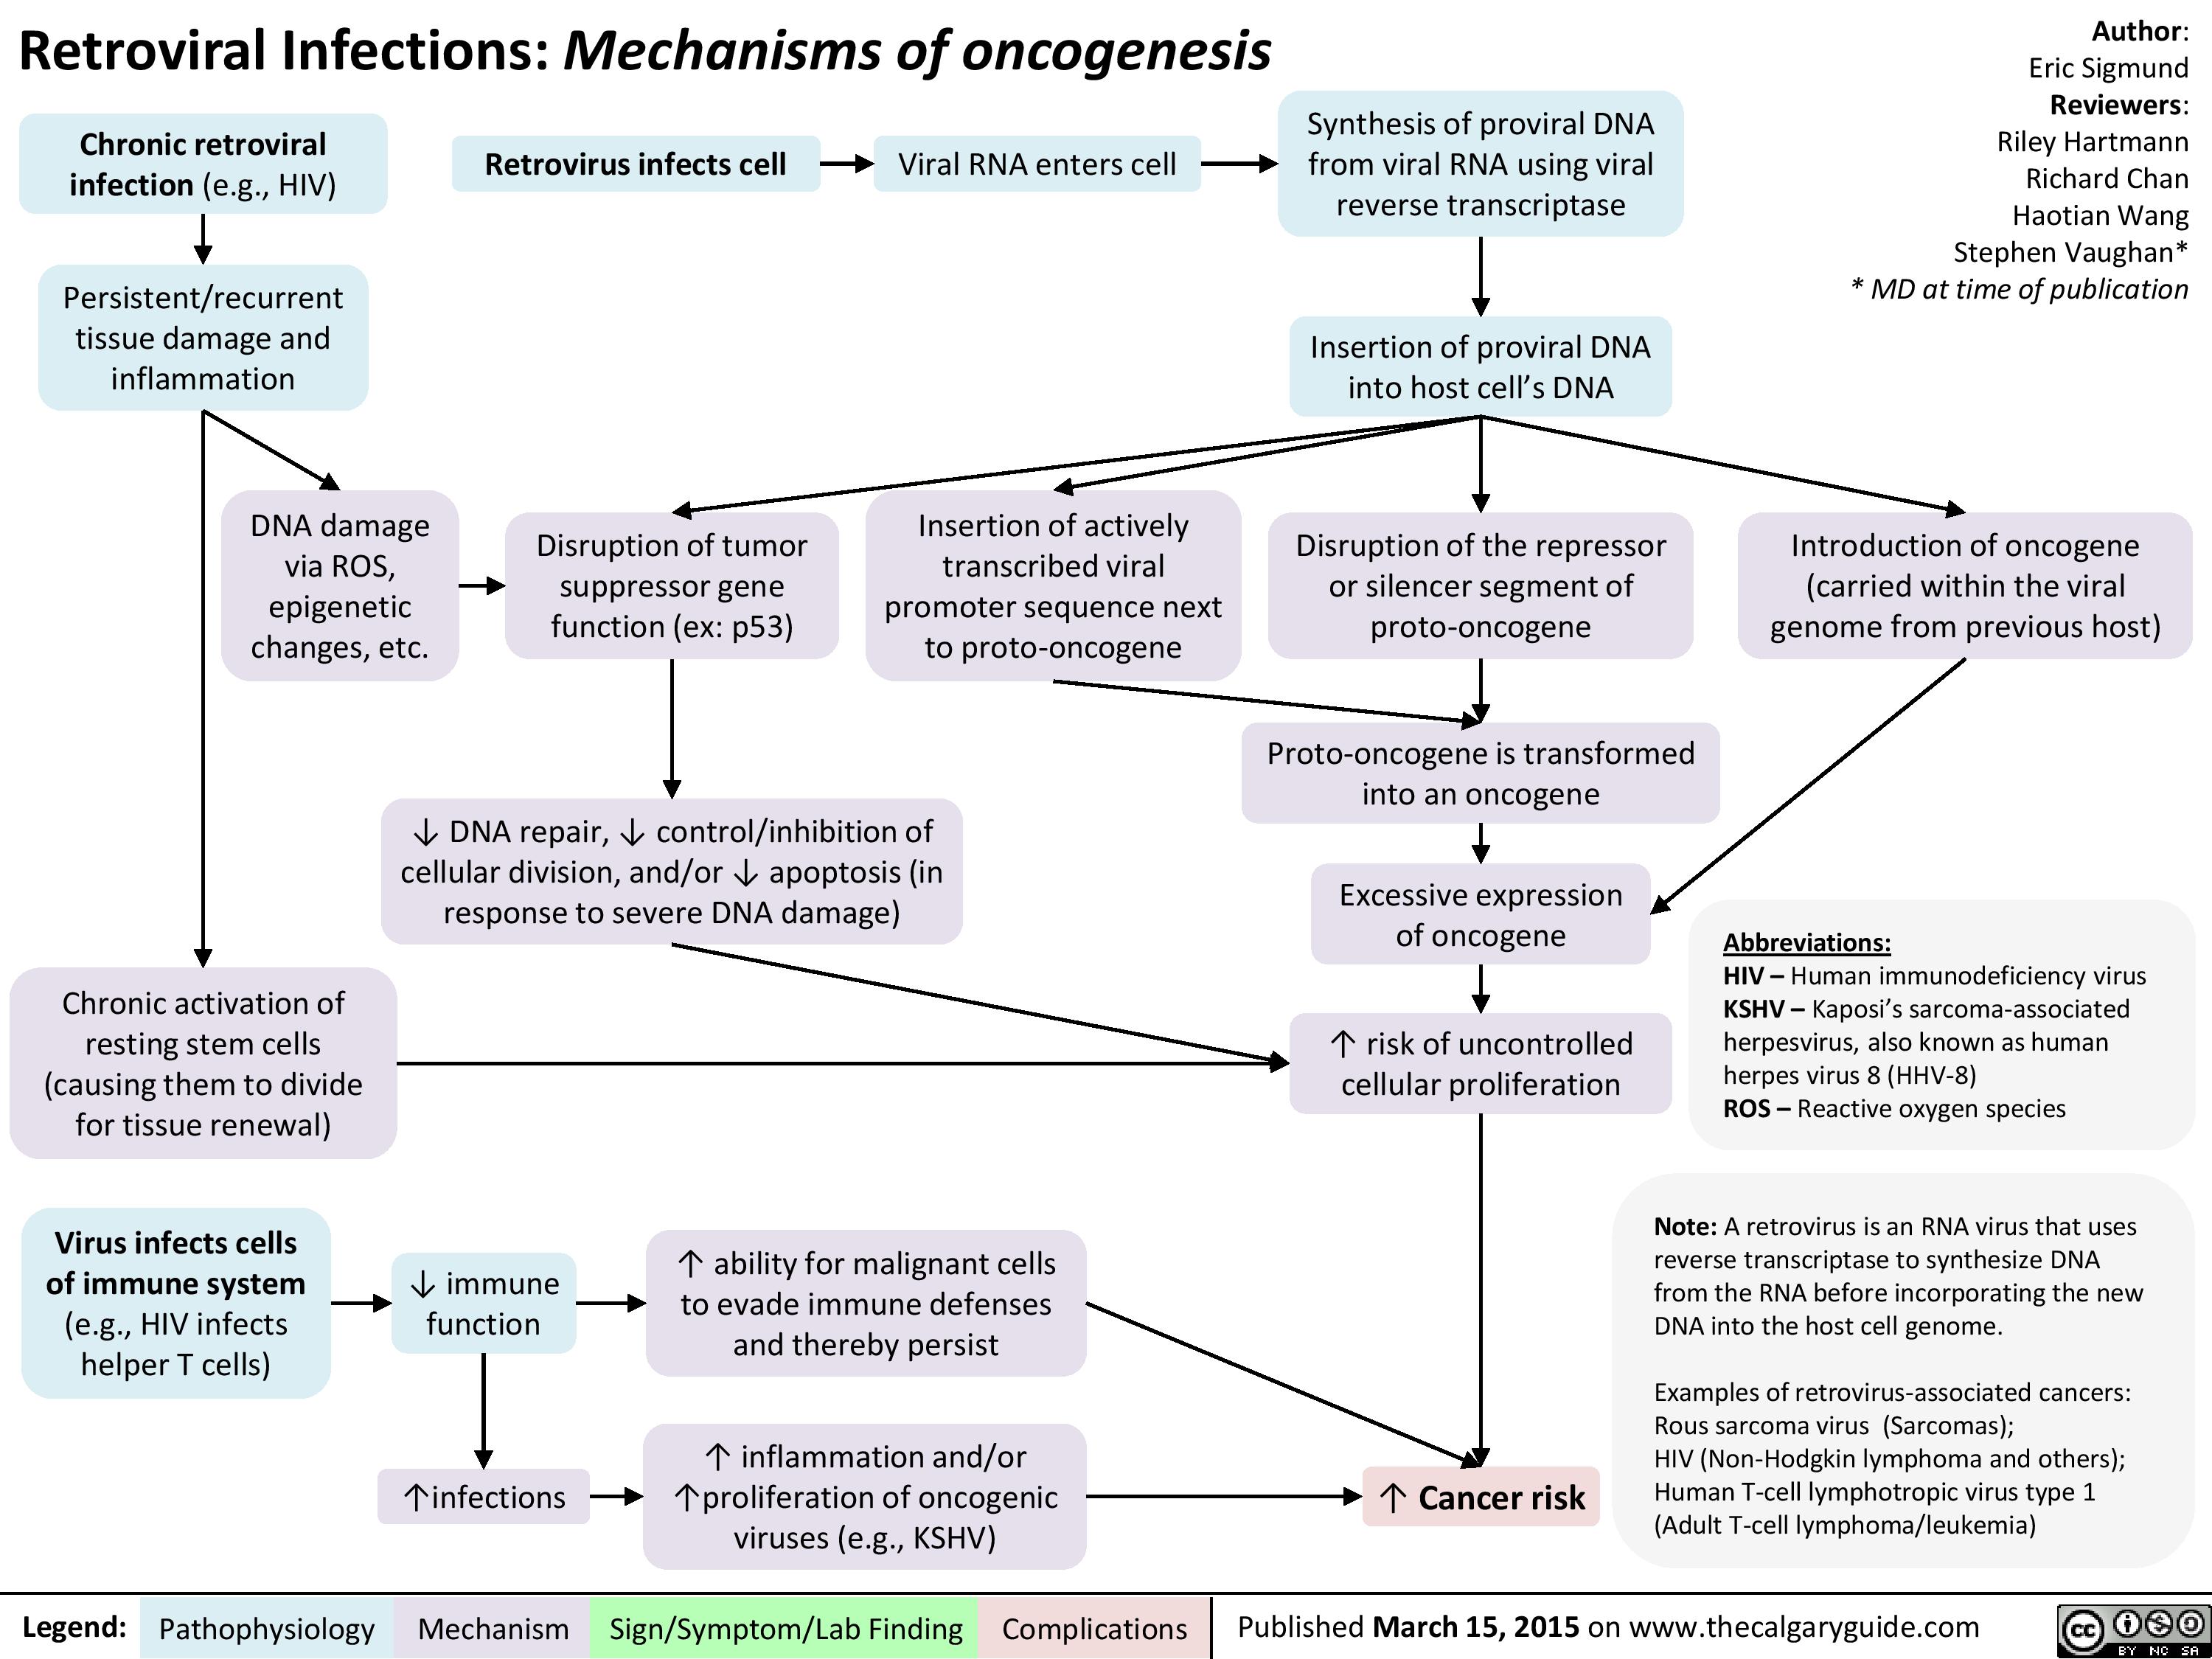 Retroviral Infections Mechanisms of oncogenesis